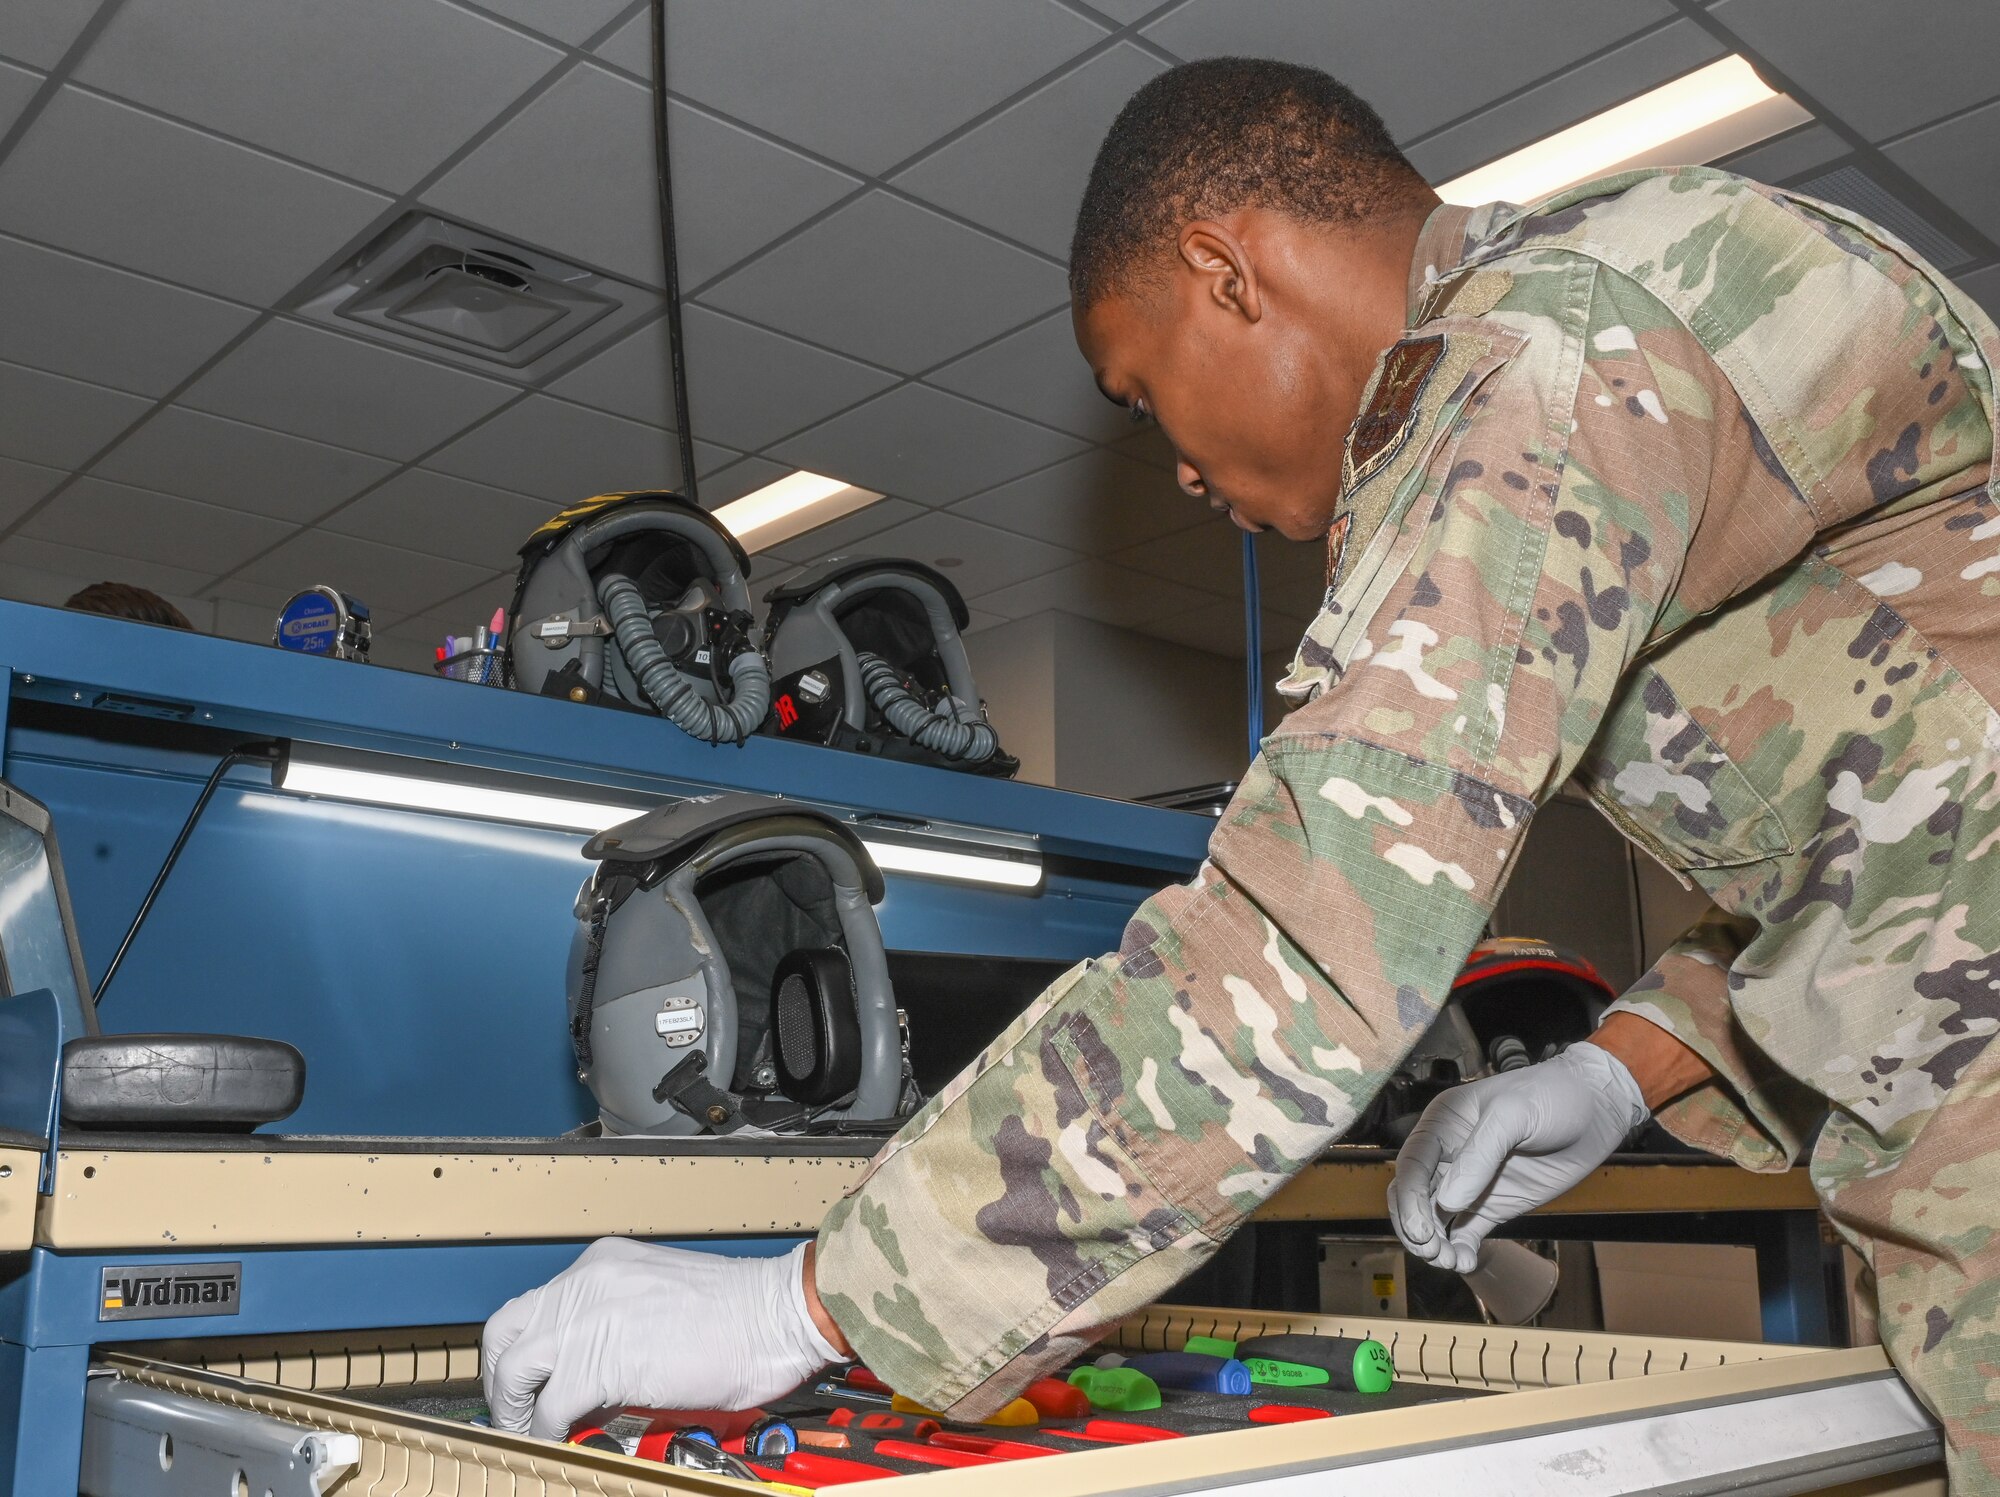 Senior Airman Anthony Ratliff, Aircrew Flight Equipment journeyman, assigned to the 509th Operations Support Squadron, gathers tools to perform a routine inspection on an aircrew member’s HGU- 55p helmet and MBU-20p mask at Whiteman Air Force Base, Missouri, Feb. 13, 2023. This process is completed by AFE Airmen every 30 days to ensure the flight equipment is in good working order. (U.S. Air Force photo by Airman 1st Class Hailey Farrell)